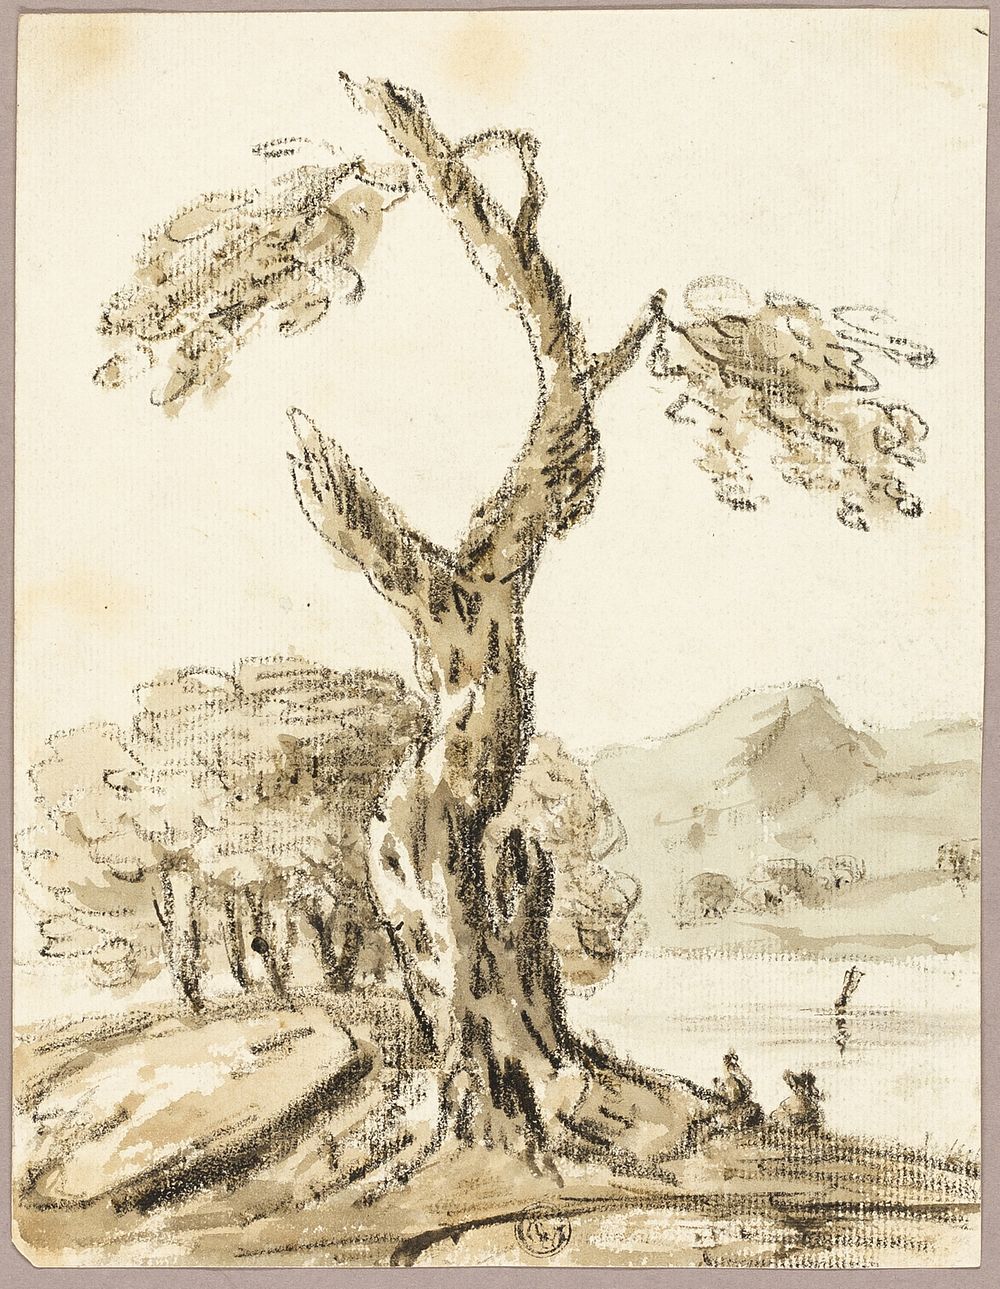 Large Tree with Lake and Mountains in Background by Thomas Barker